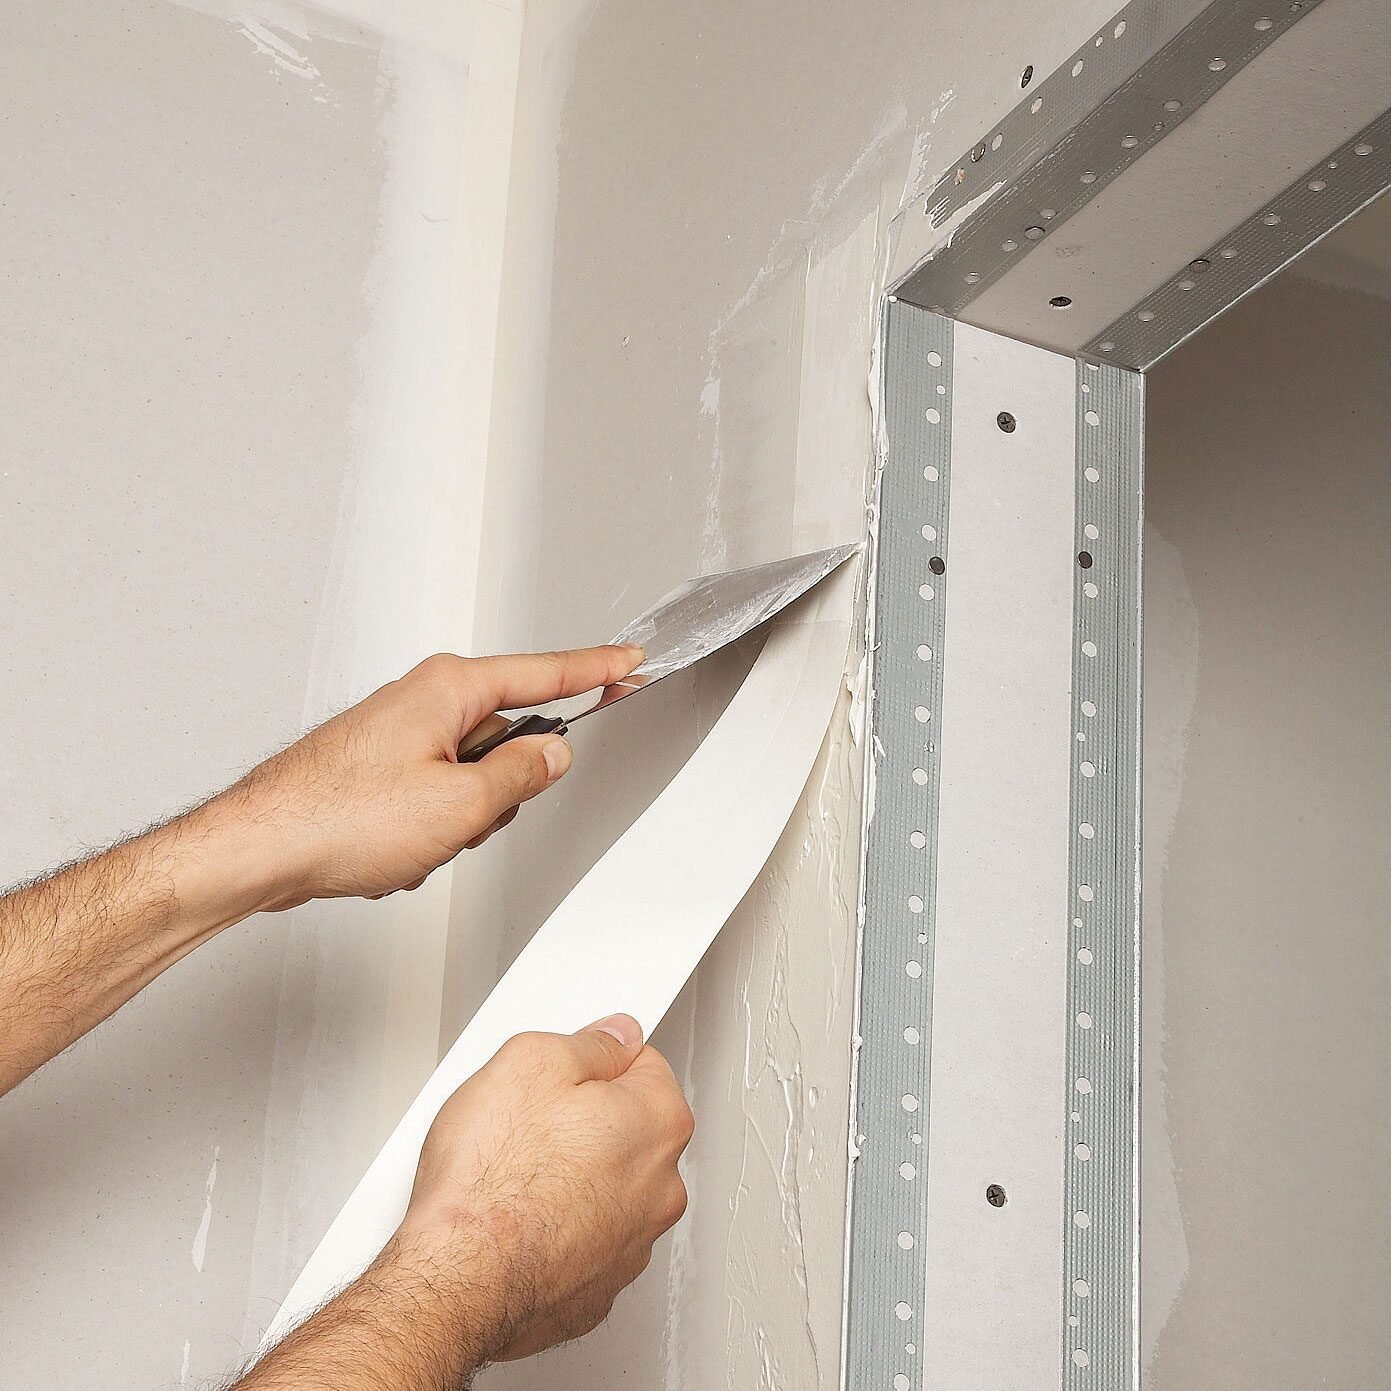 11 Drywall Taping Tips for Smoother Walls